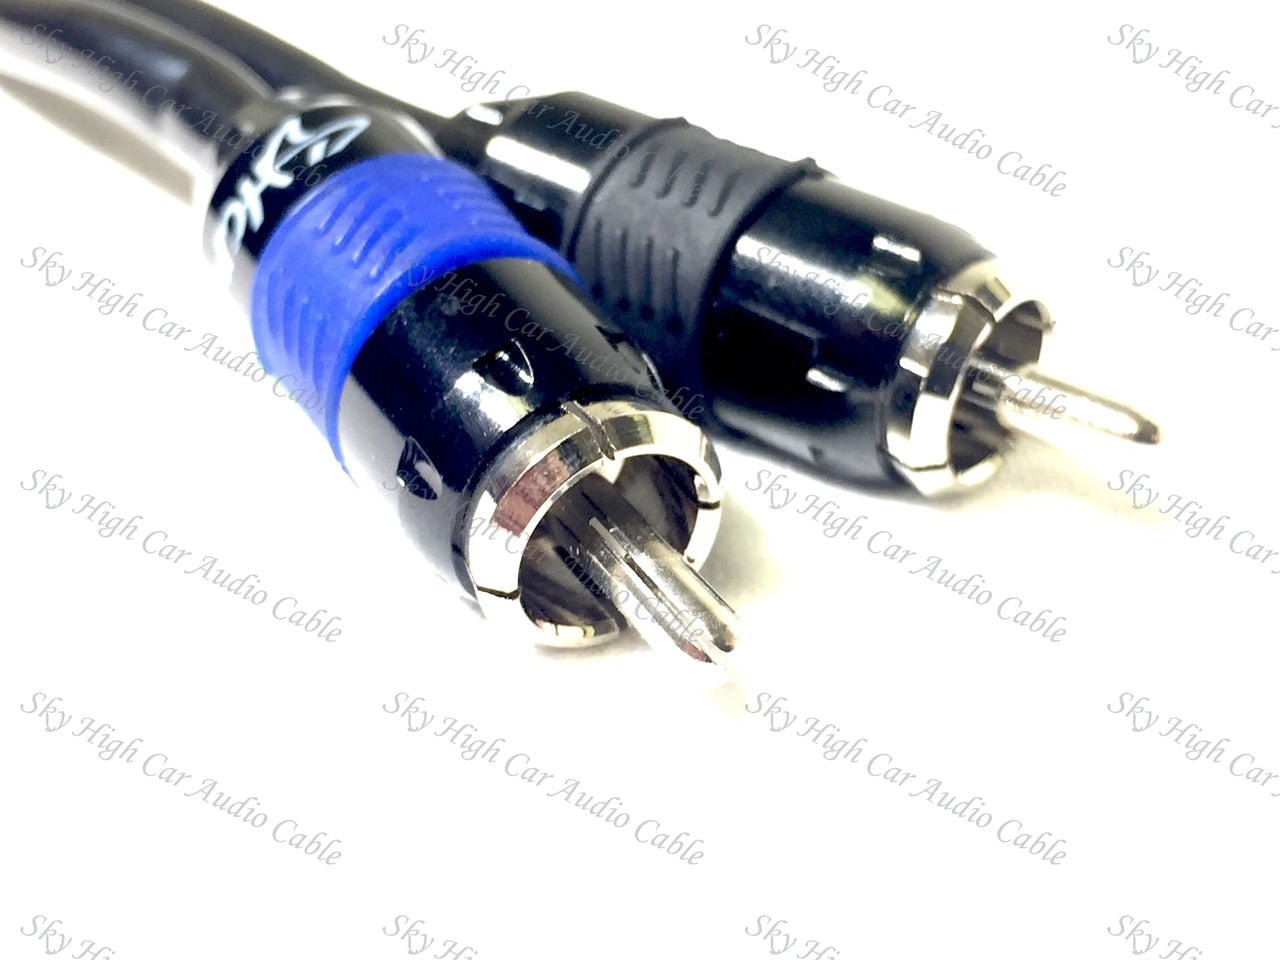 CABLE RCA - Electronica Guatemala SMD